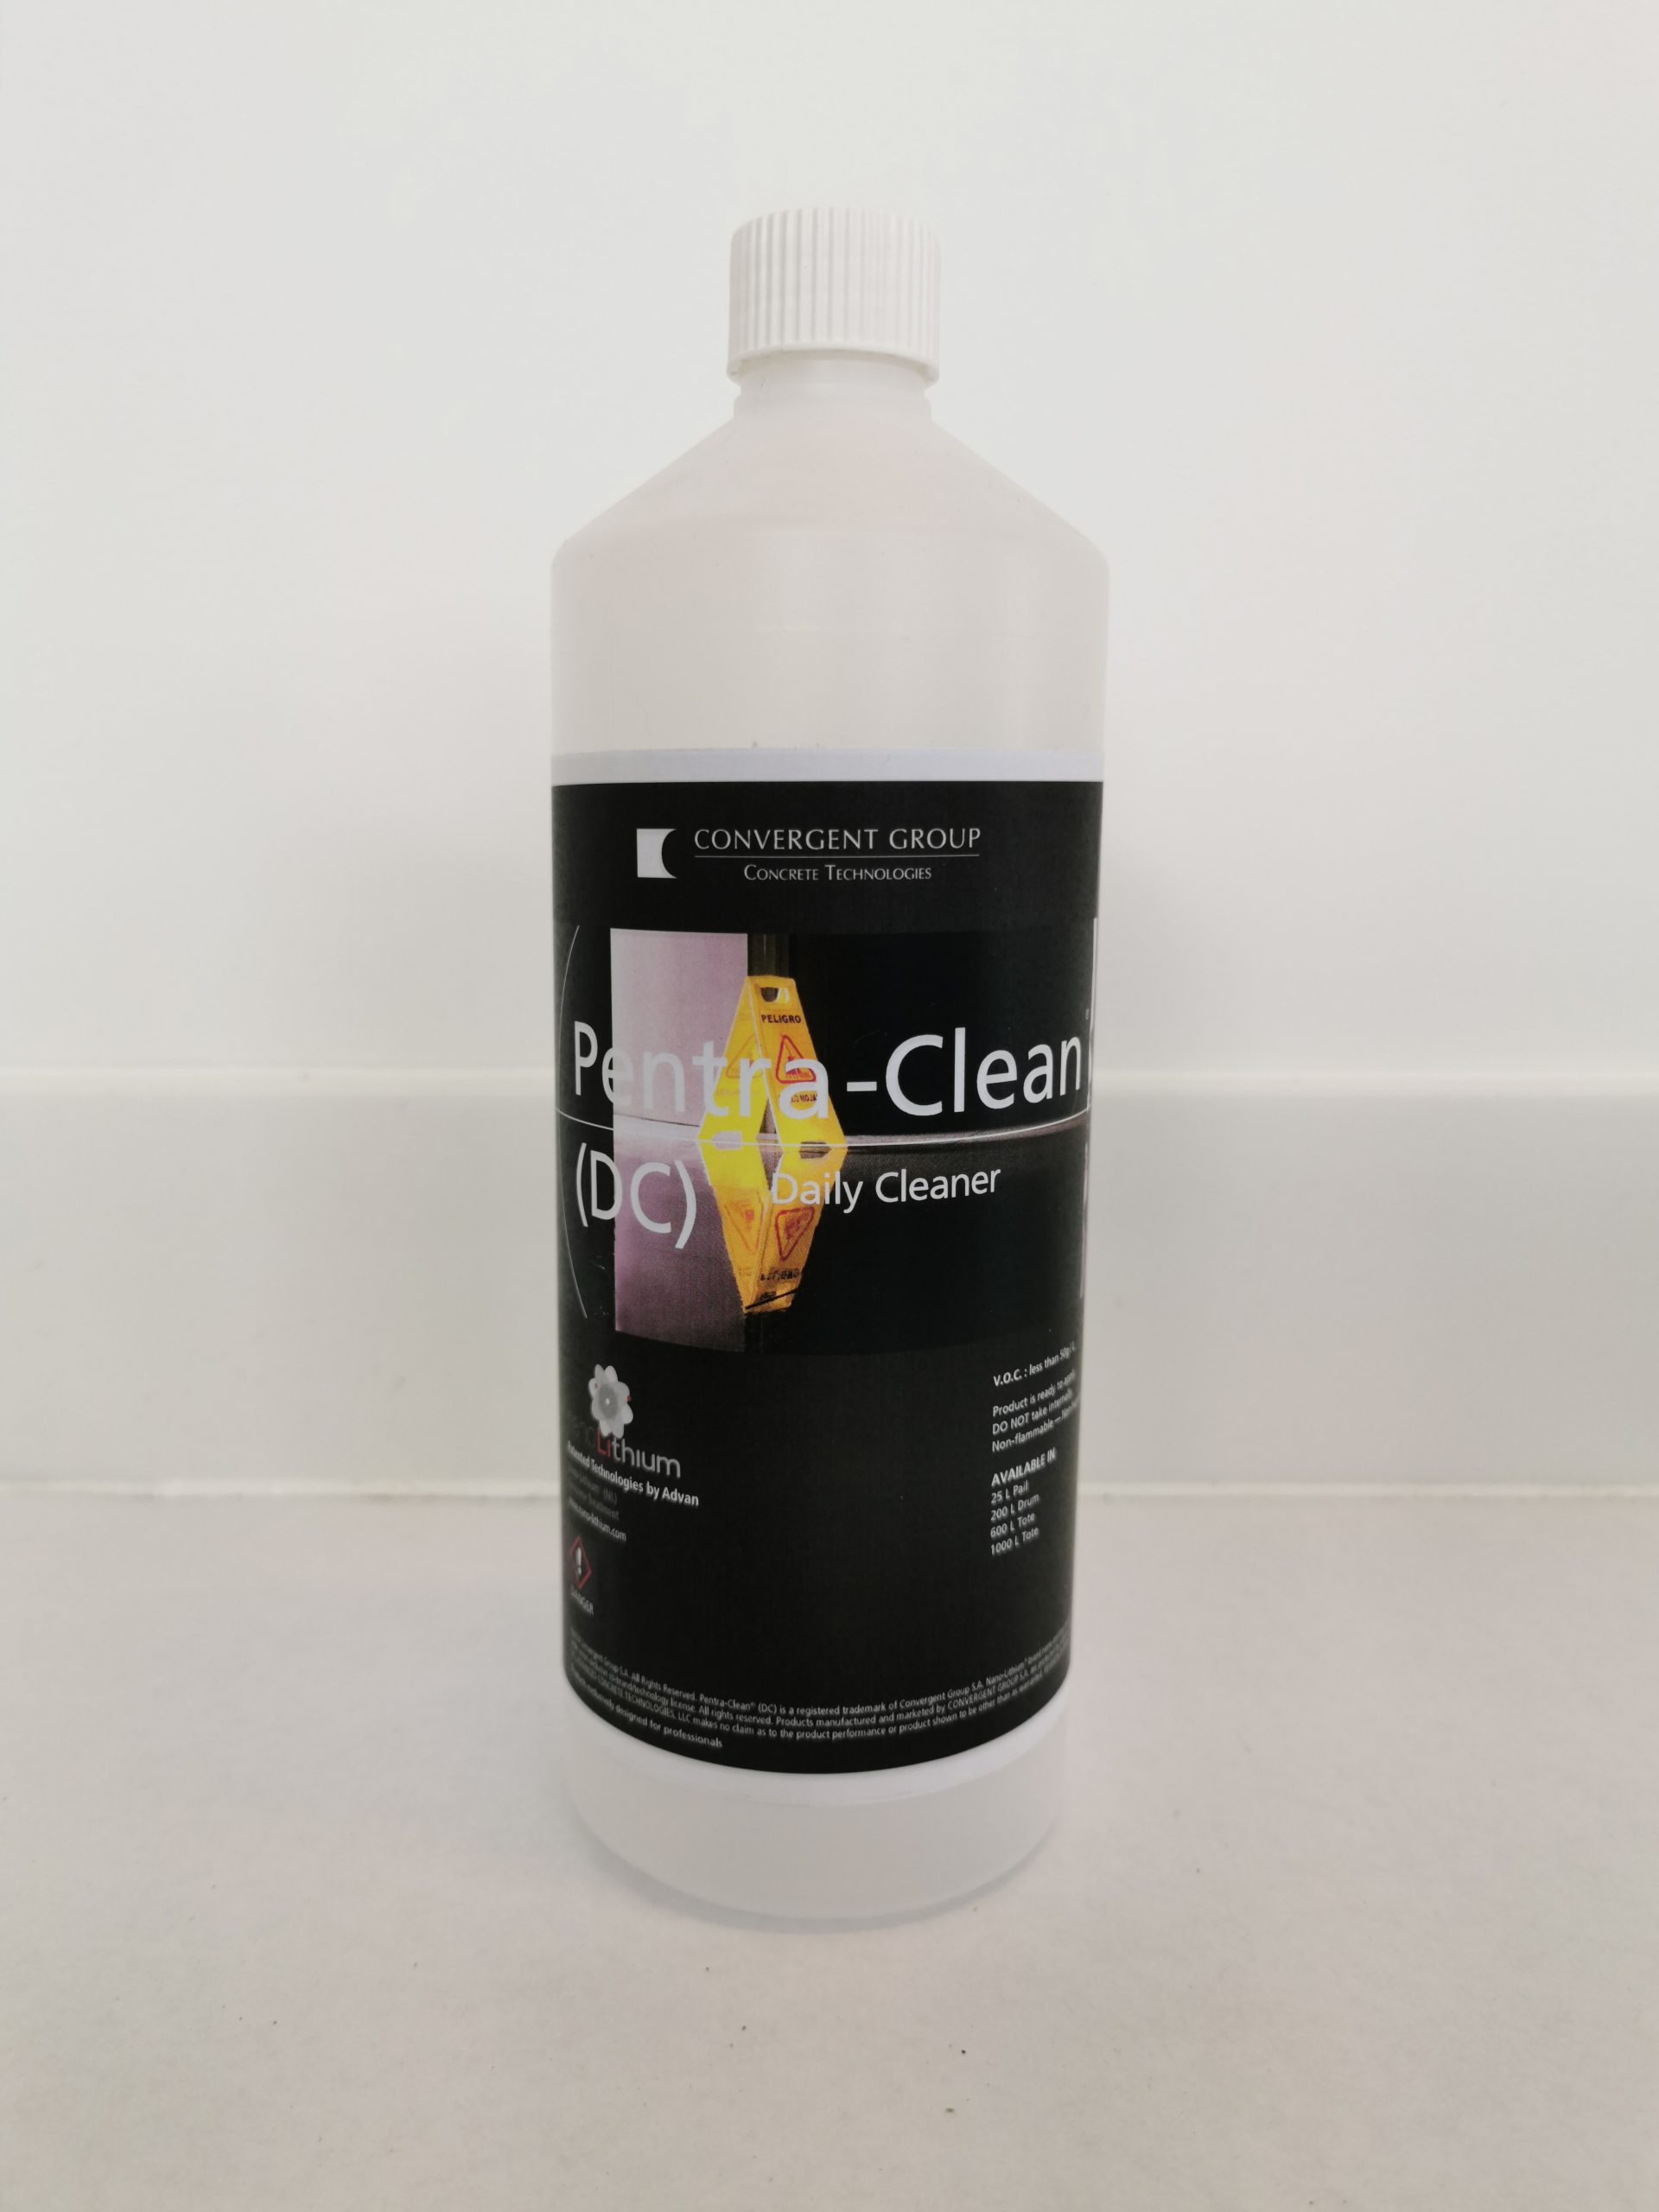 Pentra-Clean(DC) Daily Cleaner